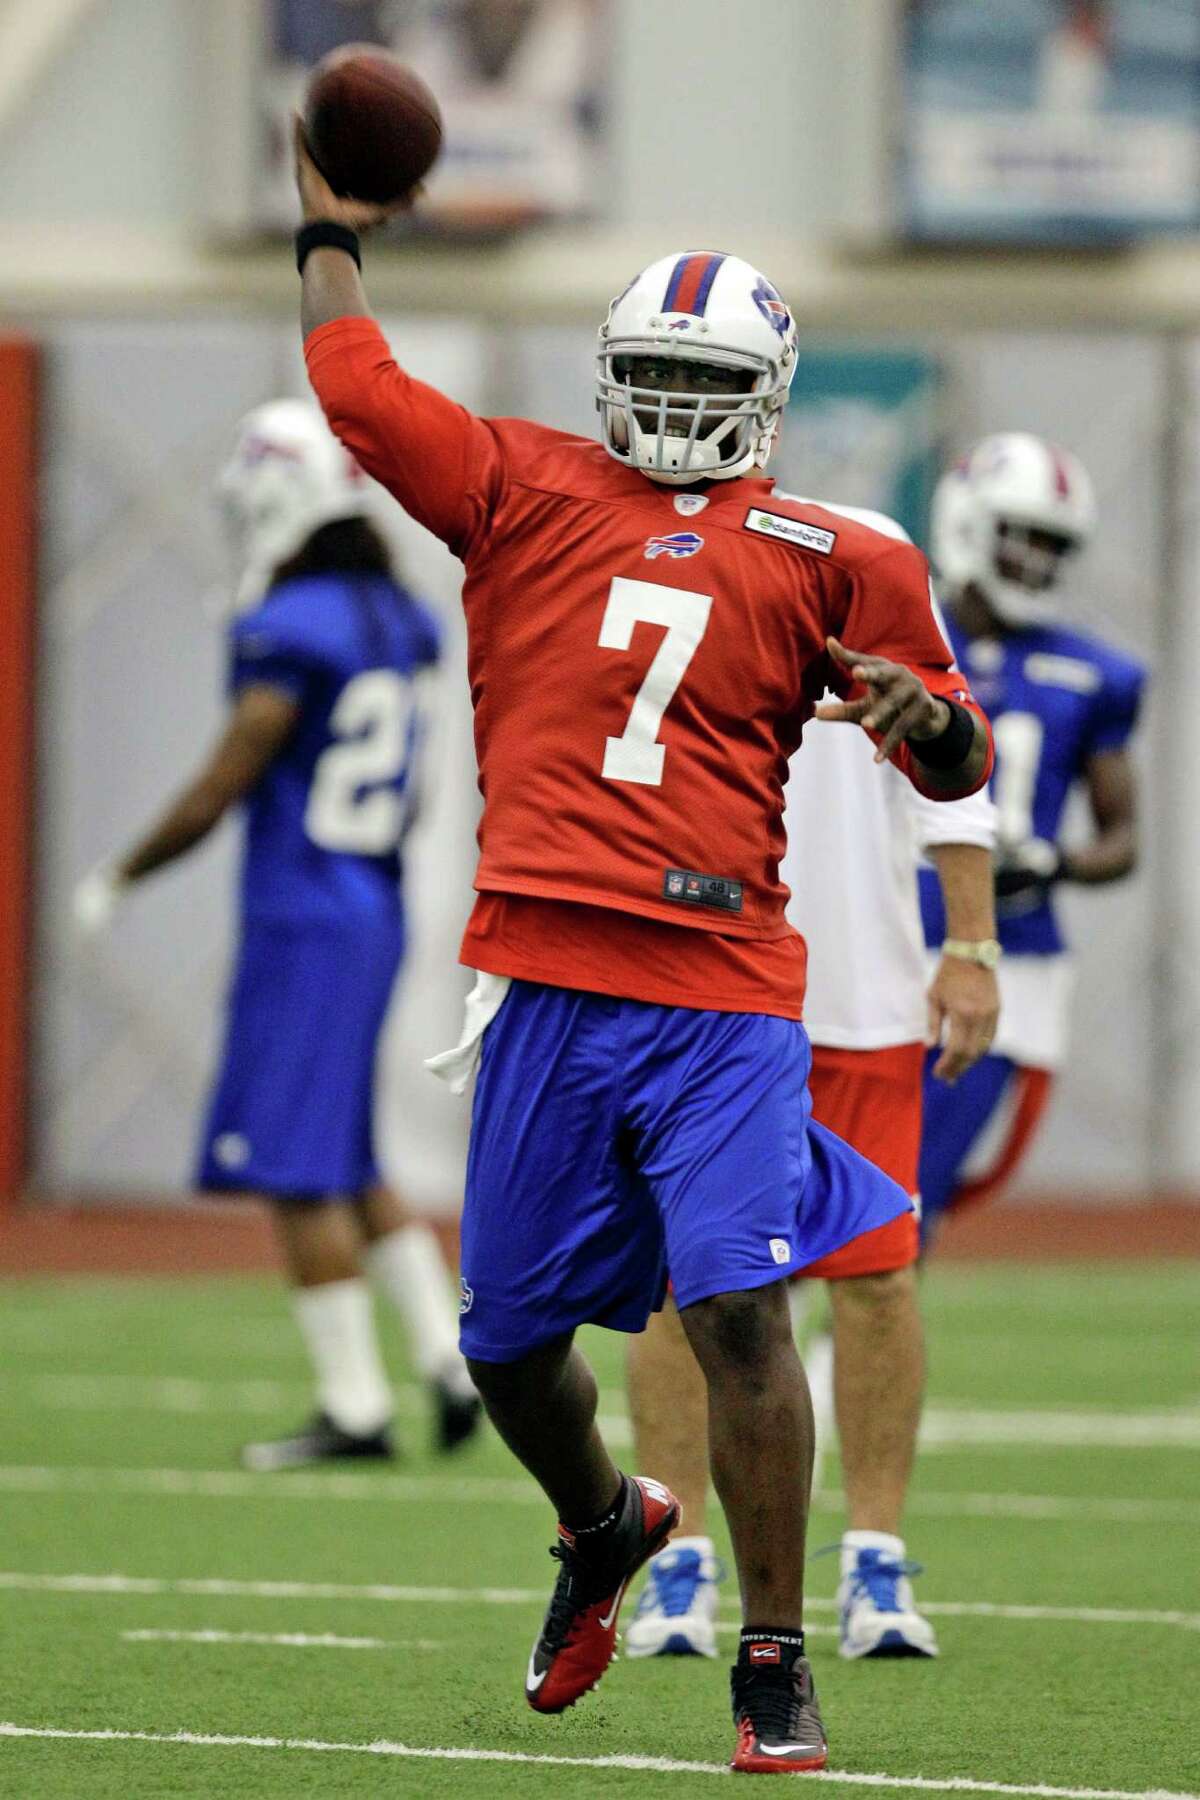 Newly acquired Buffalo Bills quarterback Tarvaris Jackson throws during NFL football practice in Orchard Park, N.Y., Monday, Aug. 27, 2012. Shortly after announcing they had released Vince Young, the Bills followed up to confirm reports that they had acquired Jackson in a trade with the Seattle Seahawks in exchange for an undisclosed draft pick. (AP Photo/David Duprey)